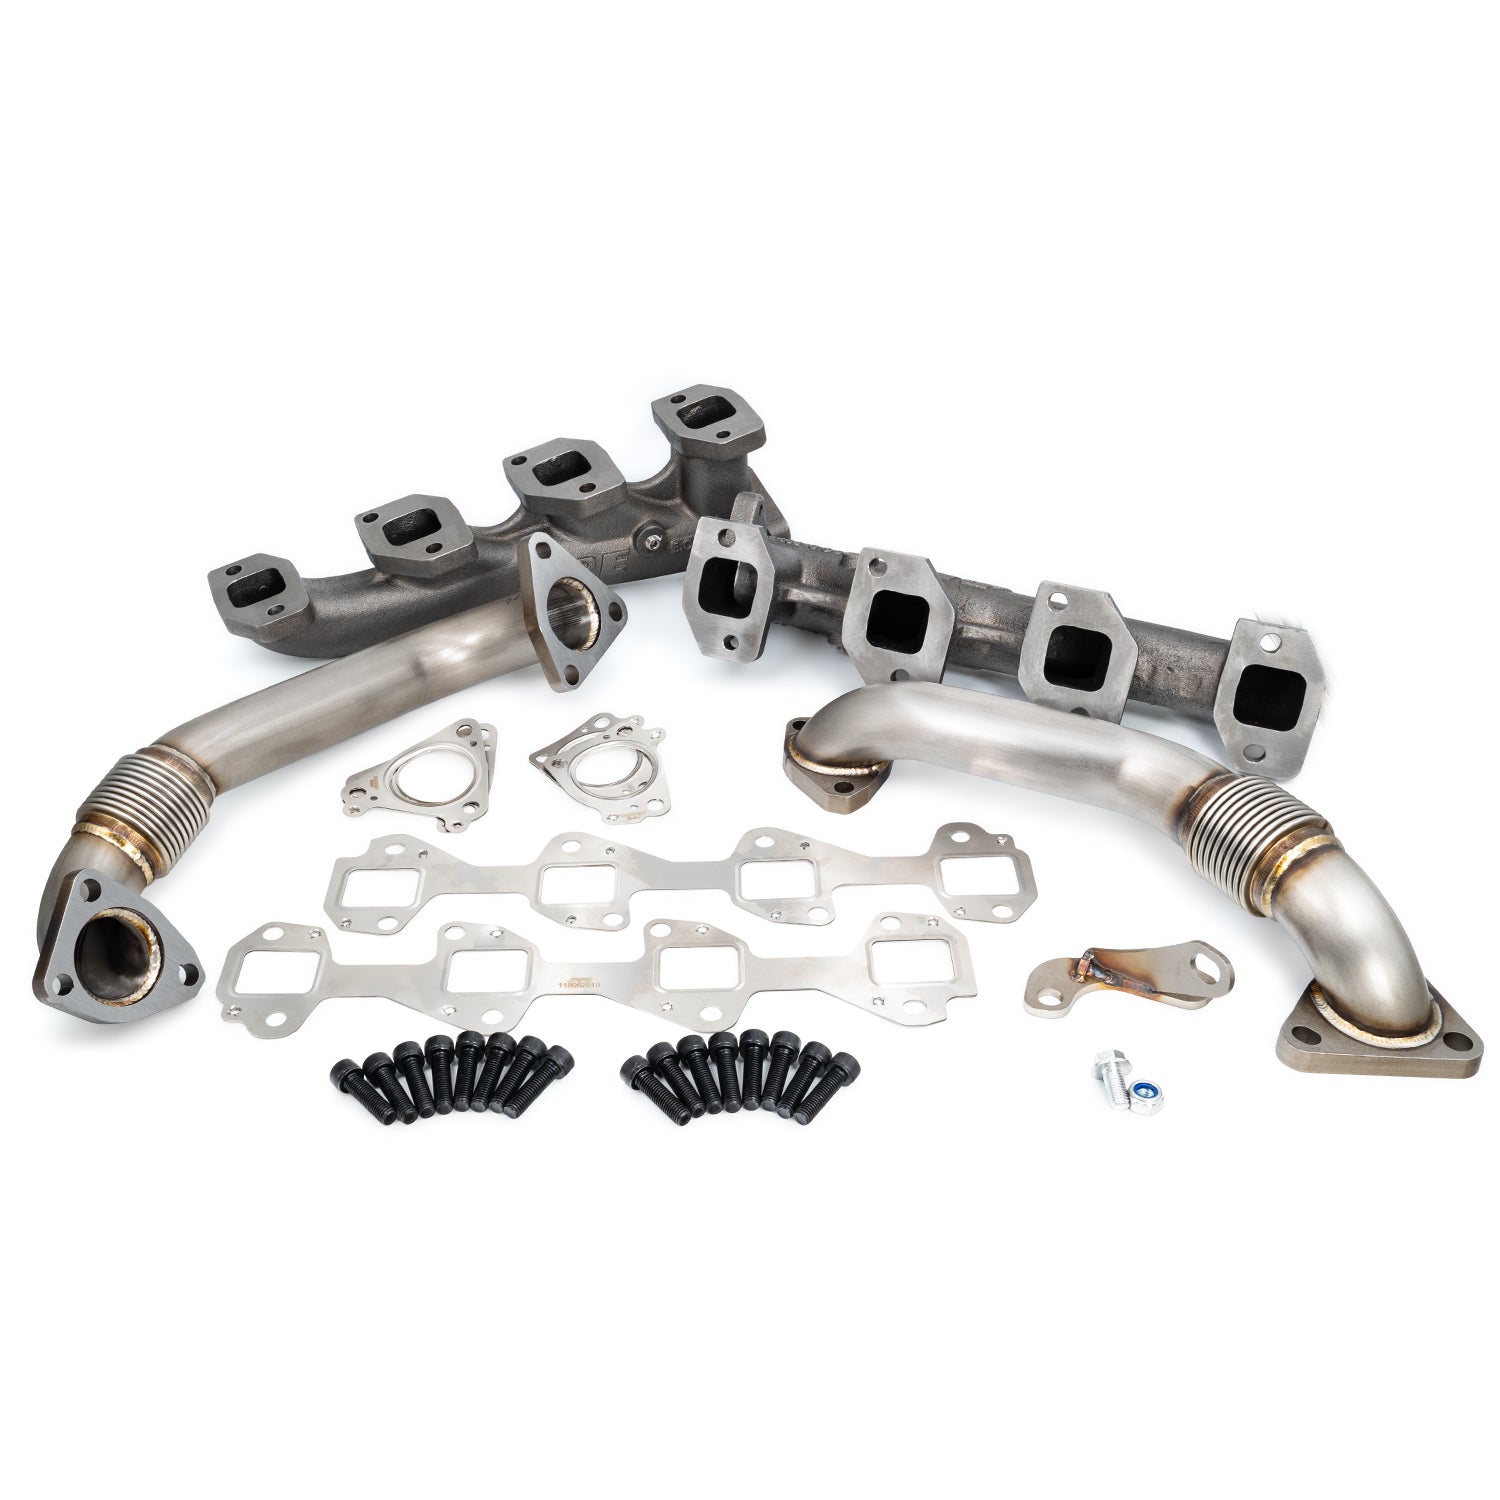 GM 6.6L Duramax High-Flow Exhaust Manifolds and Up-Pipes Kits 2001-2004